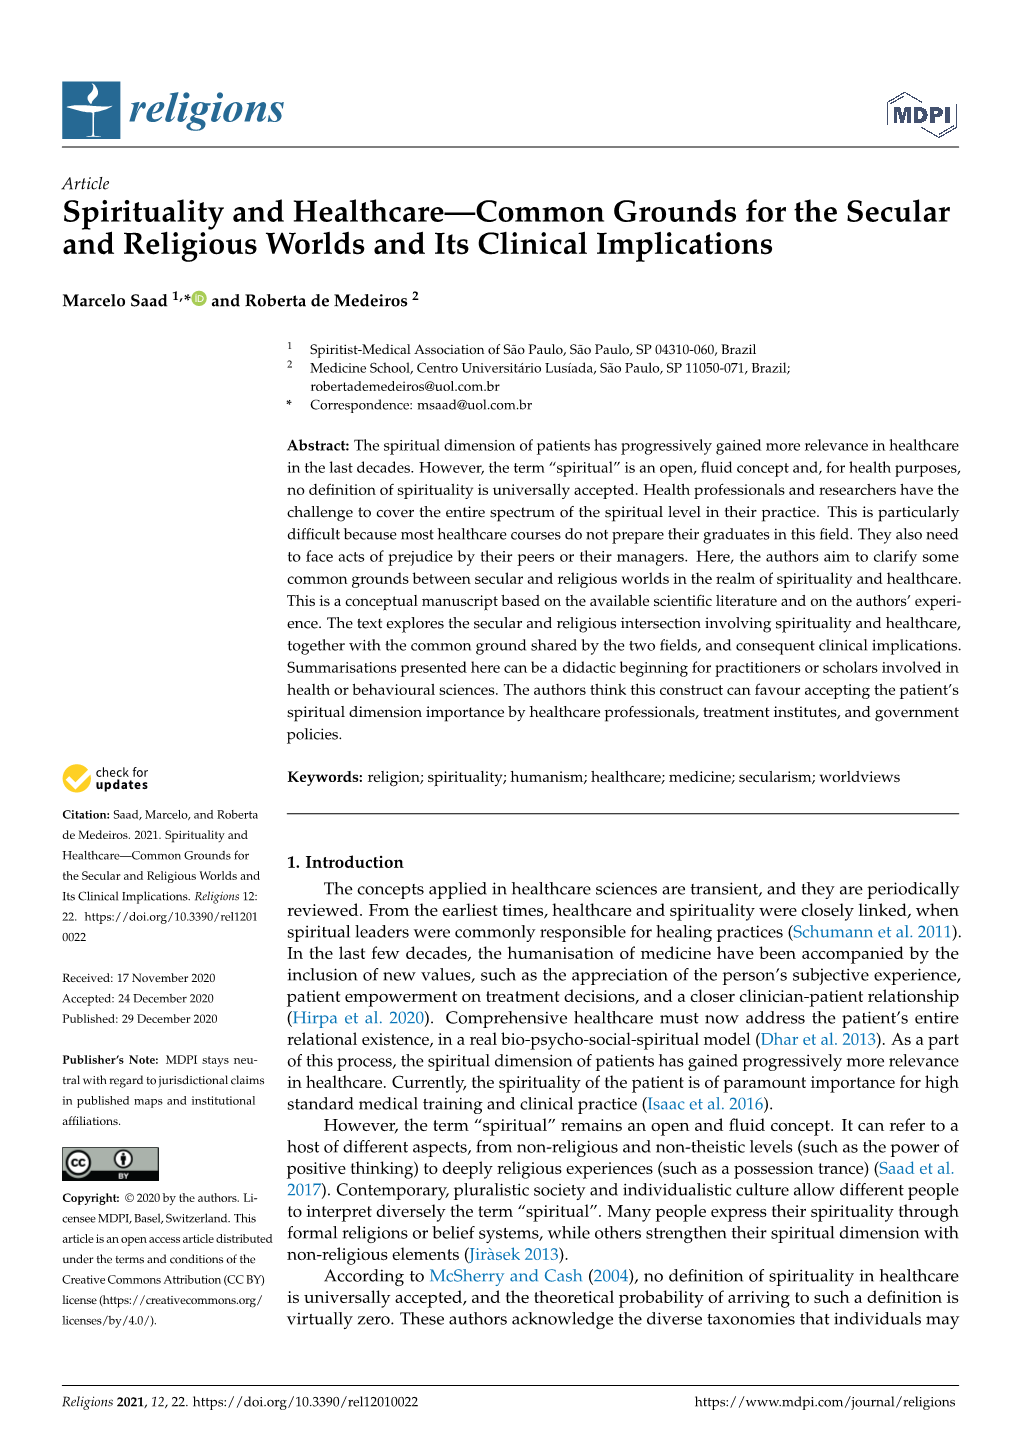 Spirituality and Healthcare—Common Grounds for the Secular and Religious Worlds and Its Clinical Implications